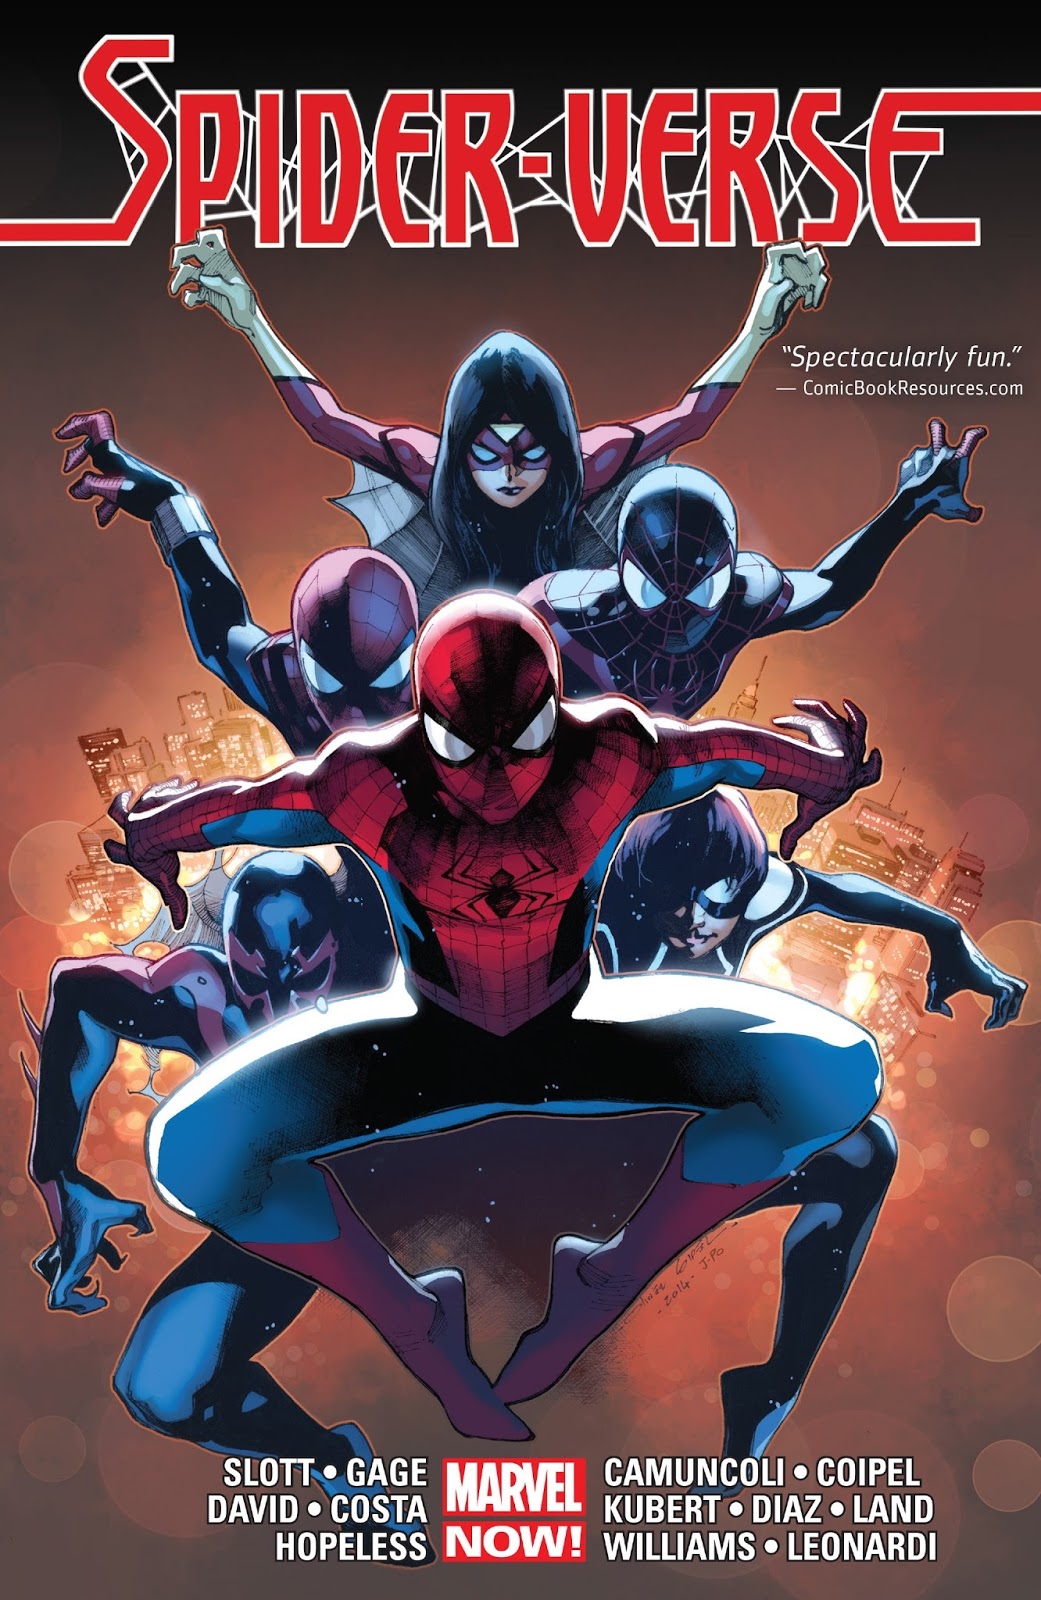 New SPIDER-VERSE miniseries by Jed Mackay and various artists coming